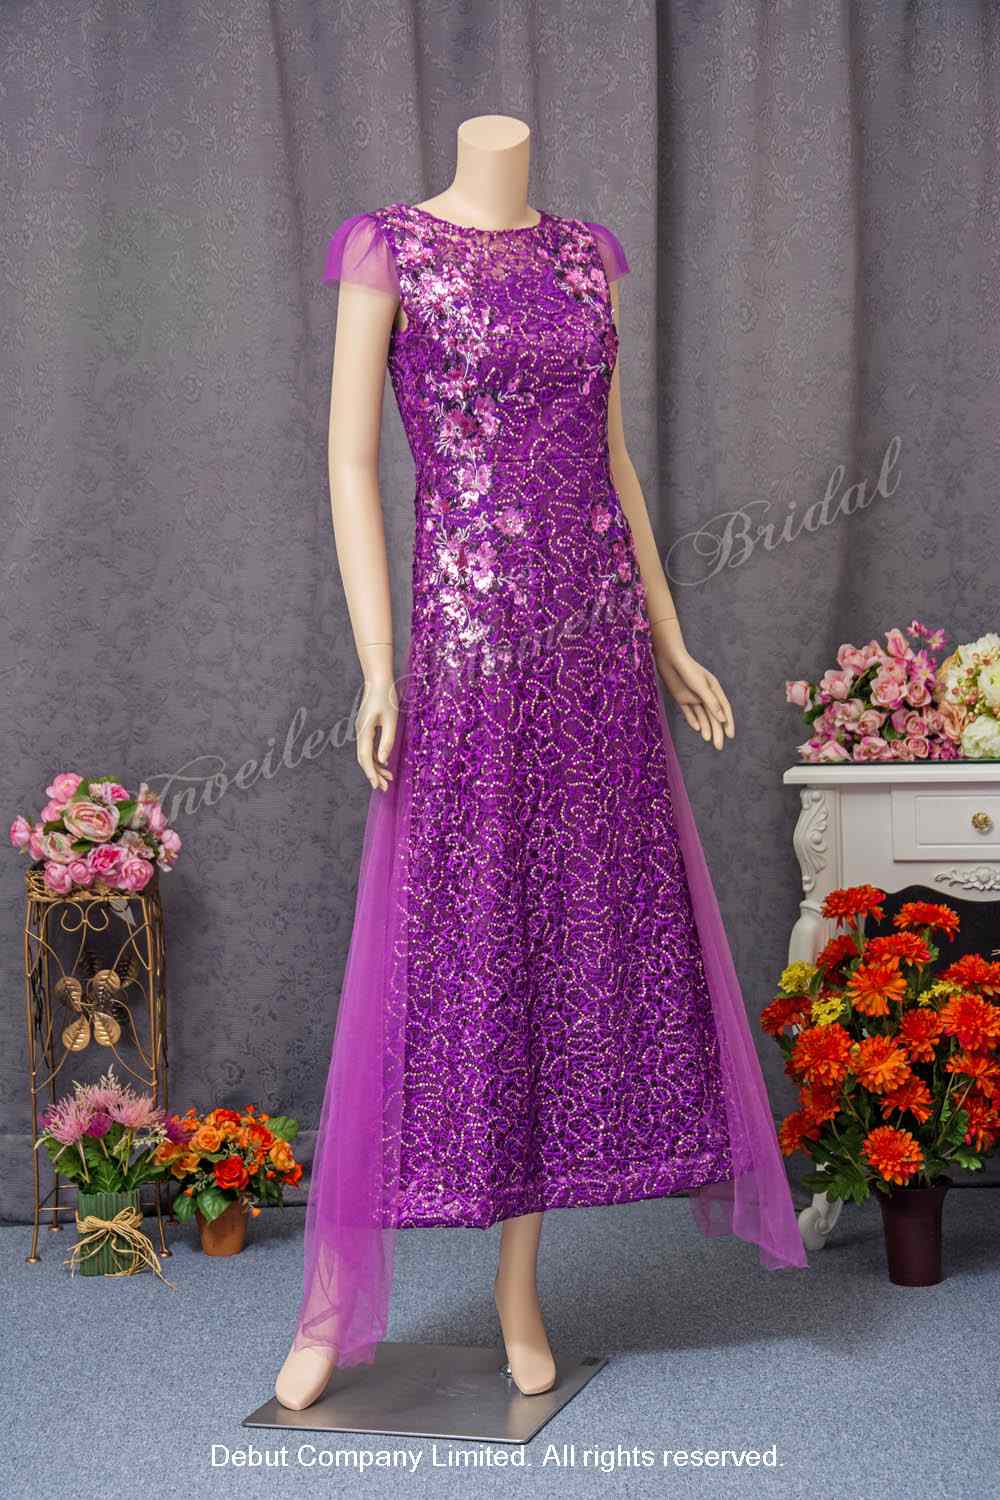 Short sleeves, round neckline, embellished with sequins, purple mother-of-the-bride Dress 短袖, 圓領, 閃片, 紫色媽咪奶奶晩裝